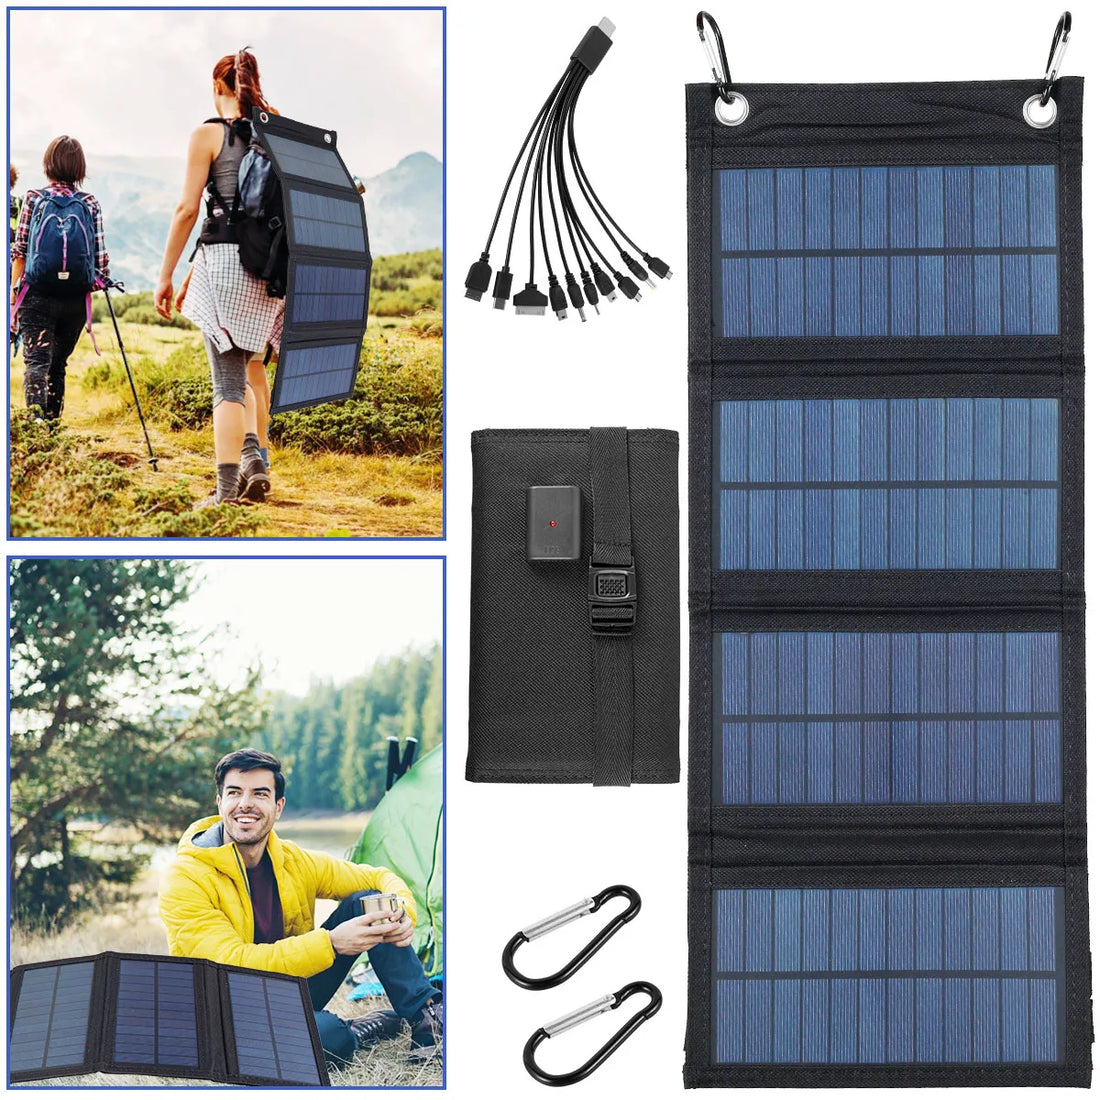  Folding Solar Panel Charger for Outdoor IP65 Waterproof USB Solar Power Charger Portable Lightweight 100W Power Phone Charger #